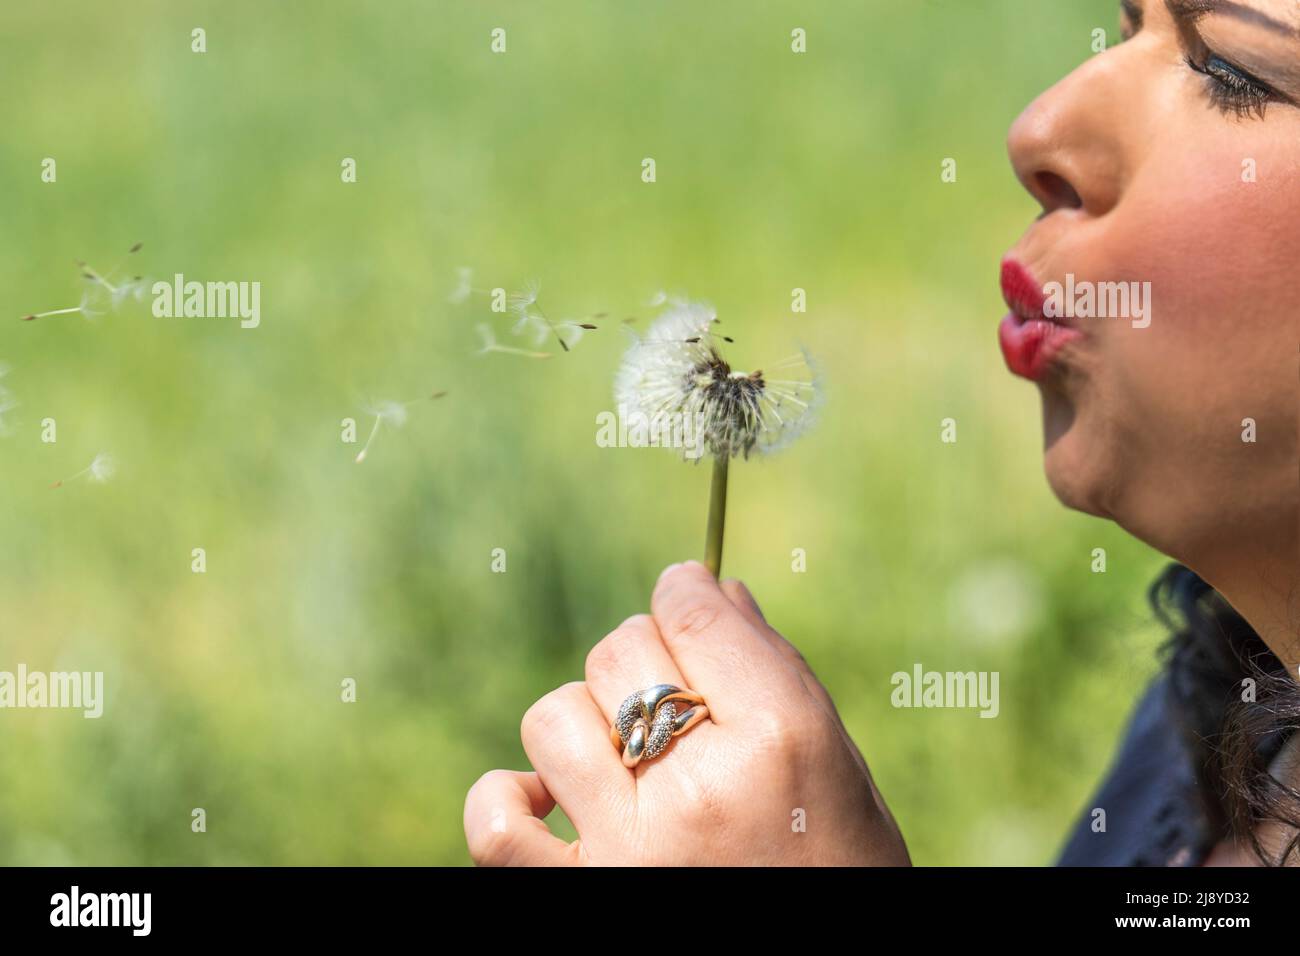 Face of a beautiful woman blowing a dandelion Stock Photo